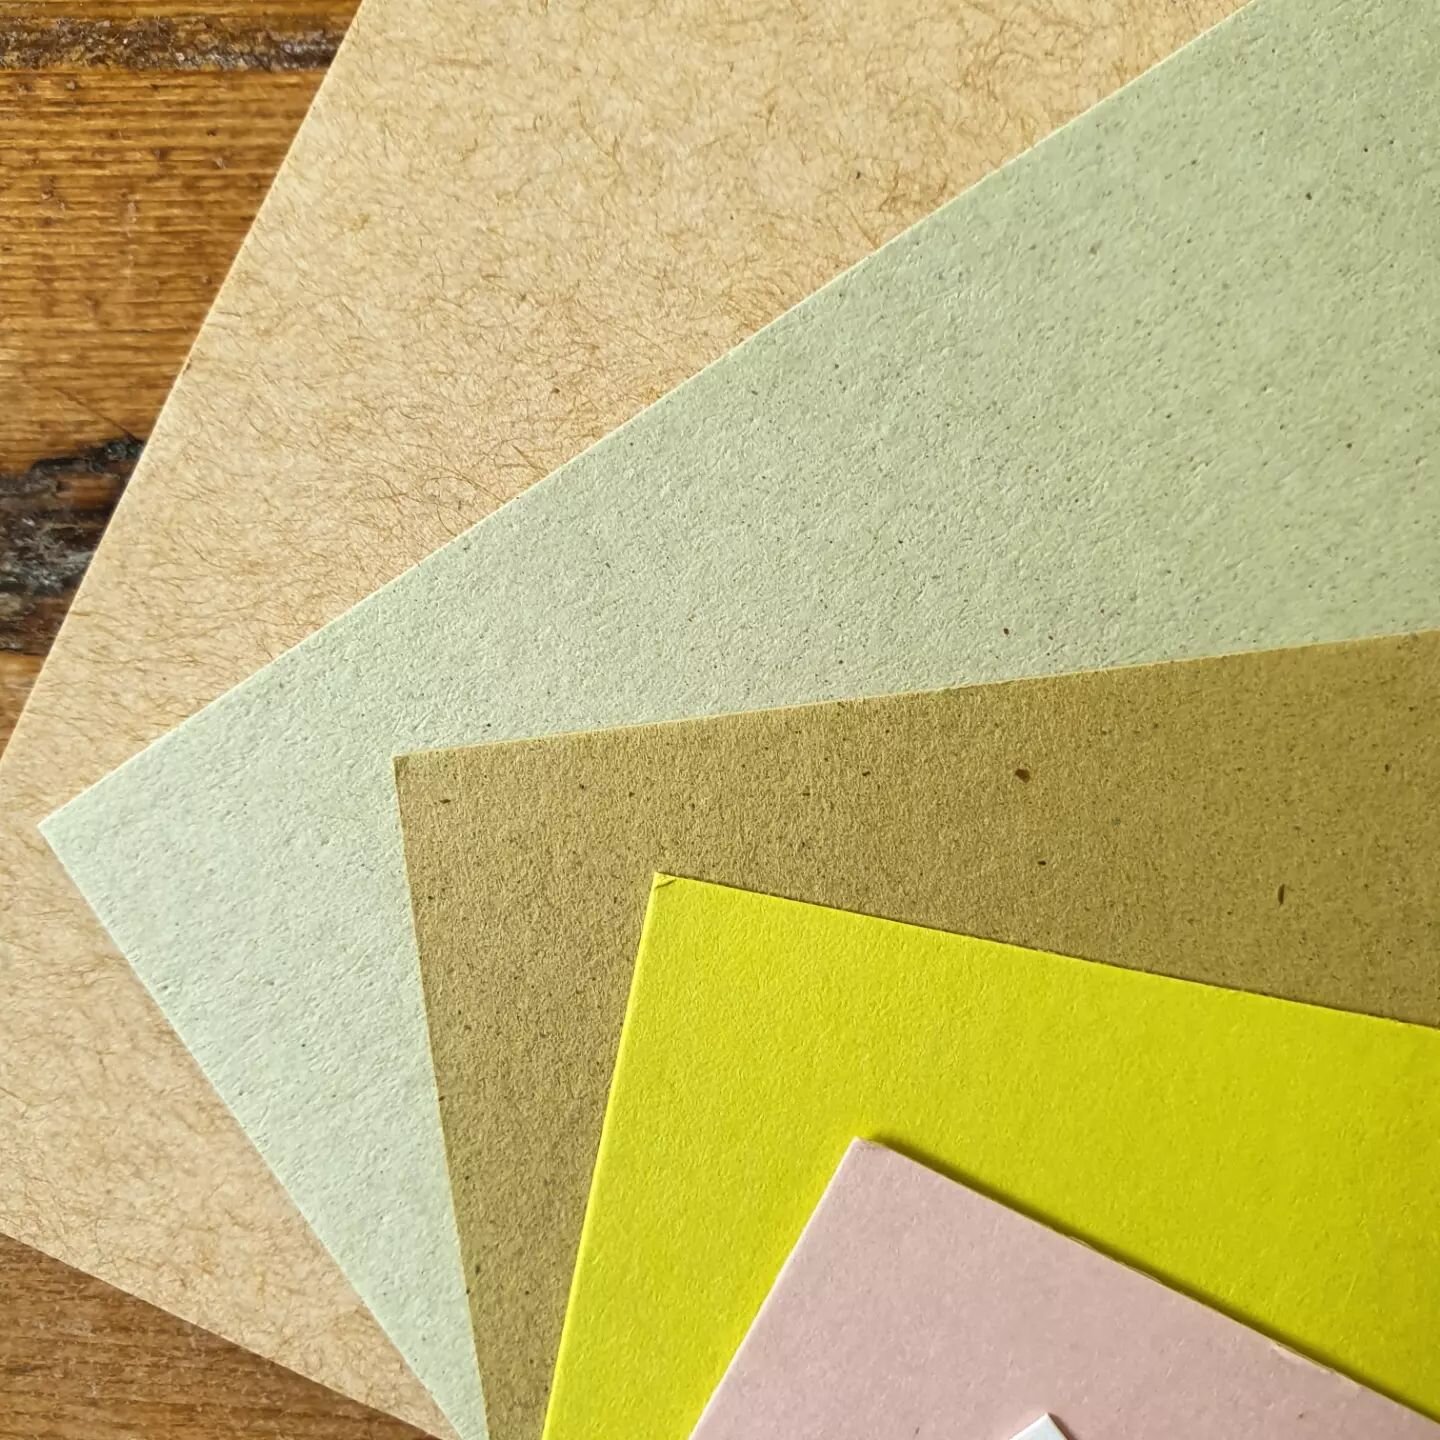 MATERIALS TO REFLECT YOUR BRAND - 

With any promotional materials or products you make as a business,  every aspect represents your ethos. 

So choosing the right card can have a massive impact on how your business is perceived, before your customer